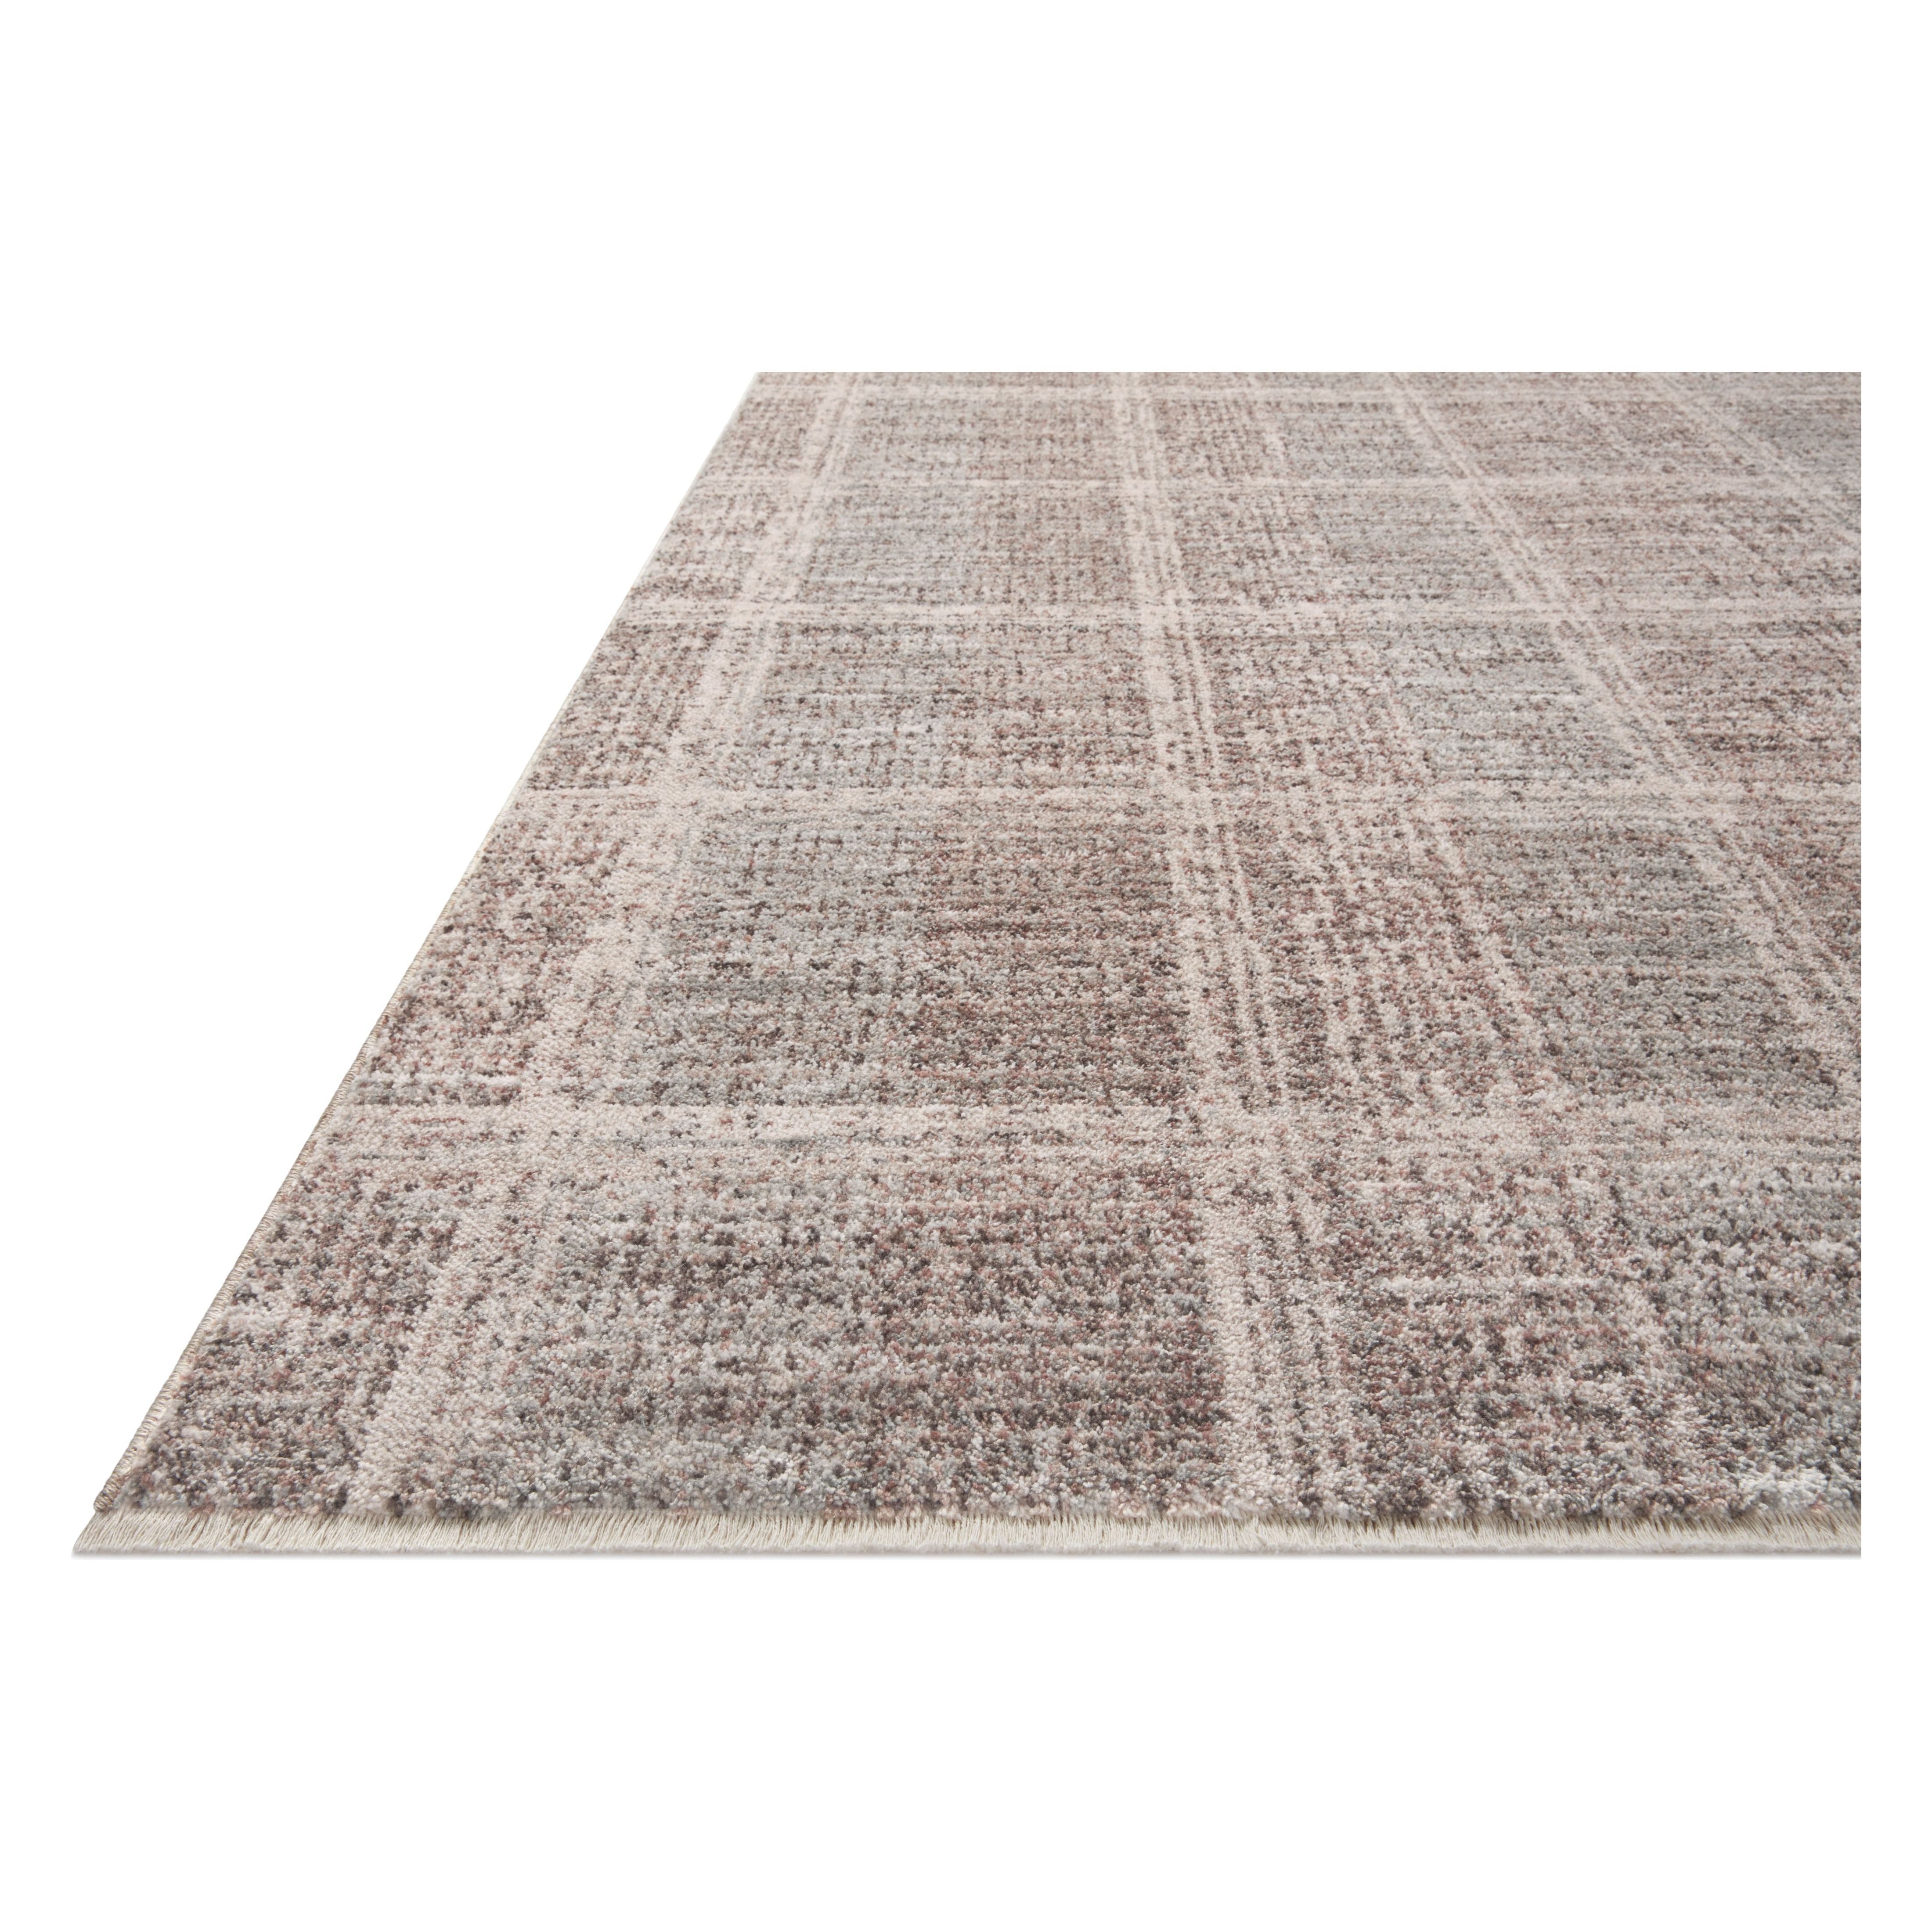 The Ember Collection by Angela Rose x Loloi is a modern flatweave area rug with a timeless plaid pattern that adds depth and coziness to any living room, bedroom, dining room, or hallway. Ember is power-loomed of 100% space-dyed polyester, a durable construction that creates a nuanced depth of color, available in a range of neutral palettes. Amethyst Home provides interior design, new home construction design consulting, vintage area rugs, and lighting in the Newport Beach metro area.